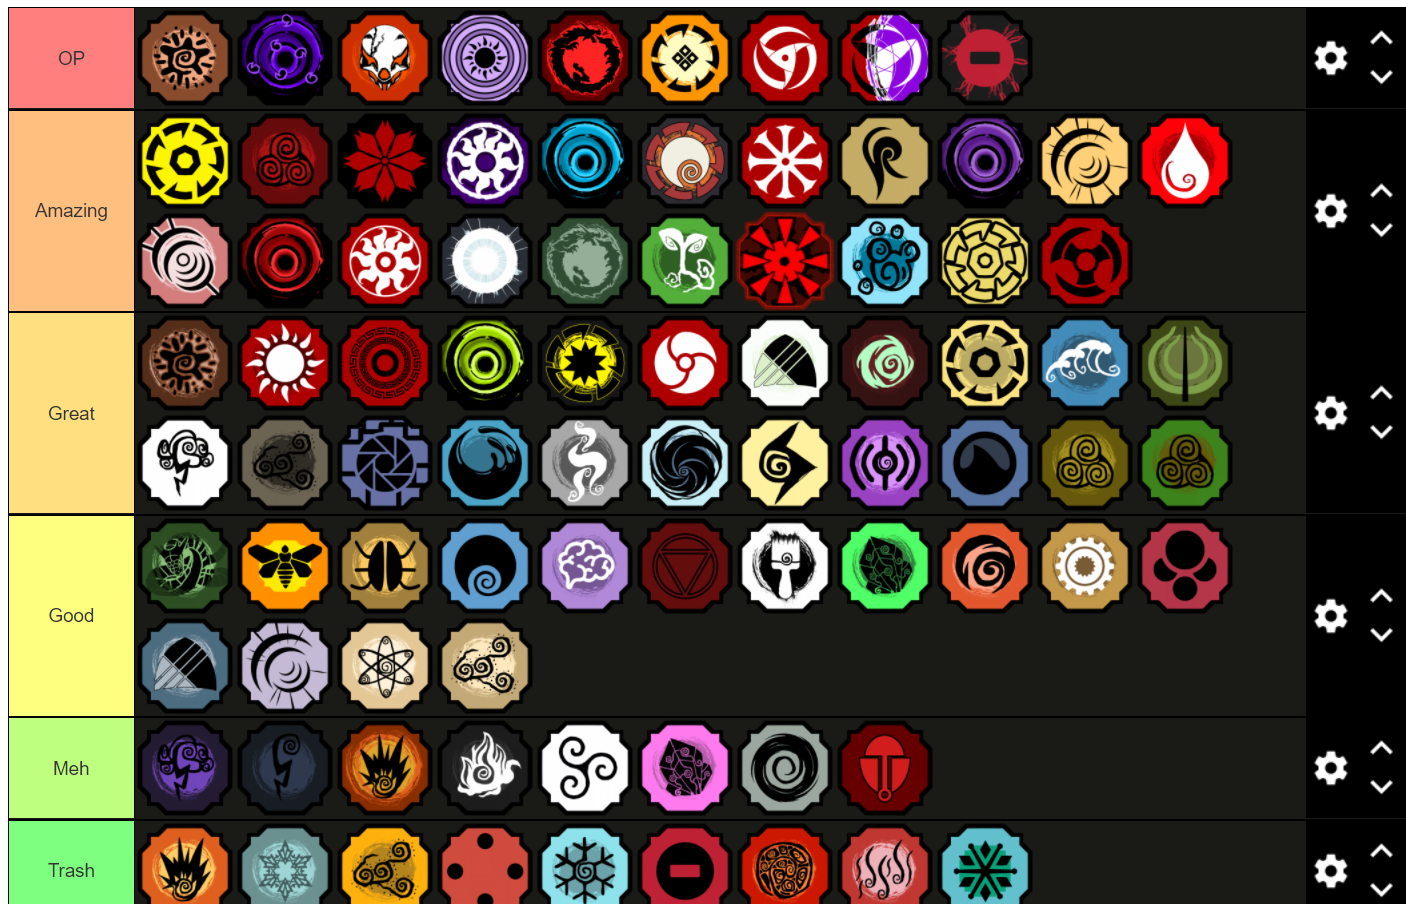 Create a Shindo Life Bloodlines (Newest) Tier Tier List - TierMaker